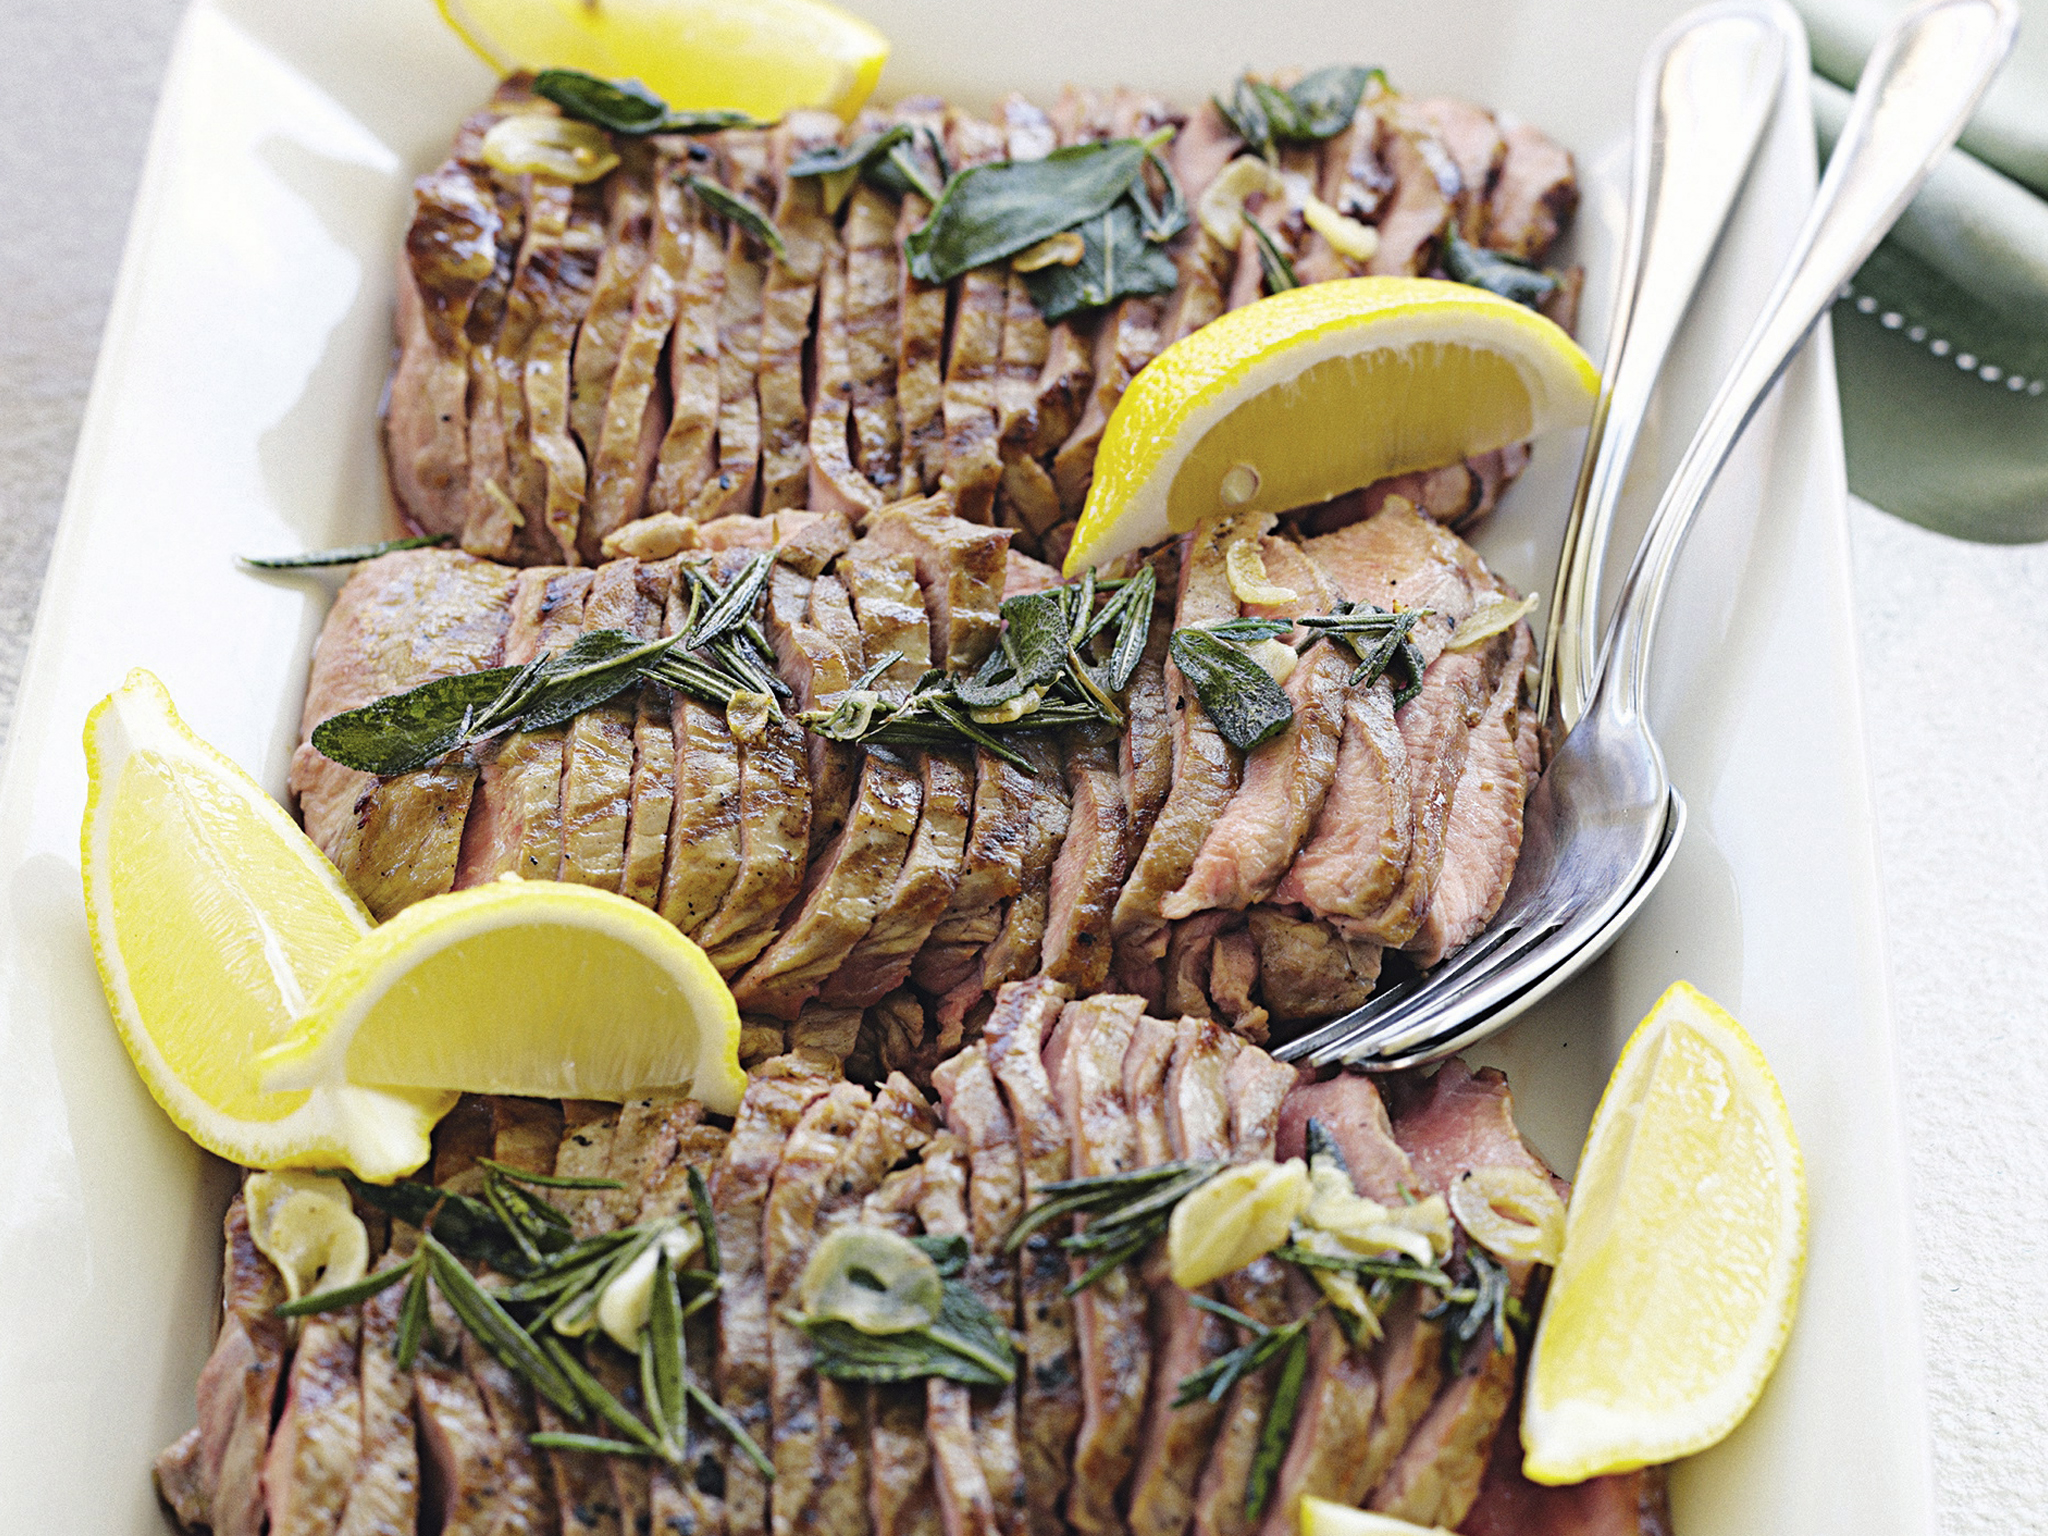 Barbecue veal loin with rosemary and garlic